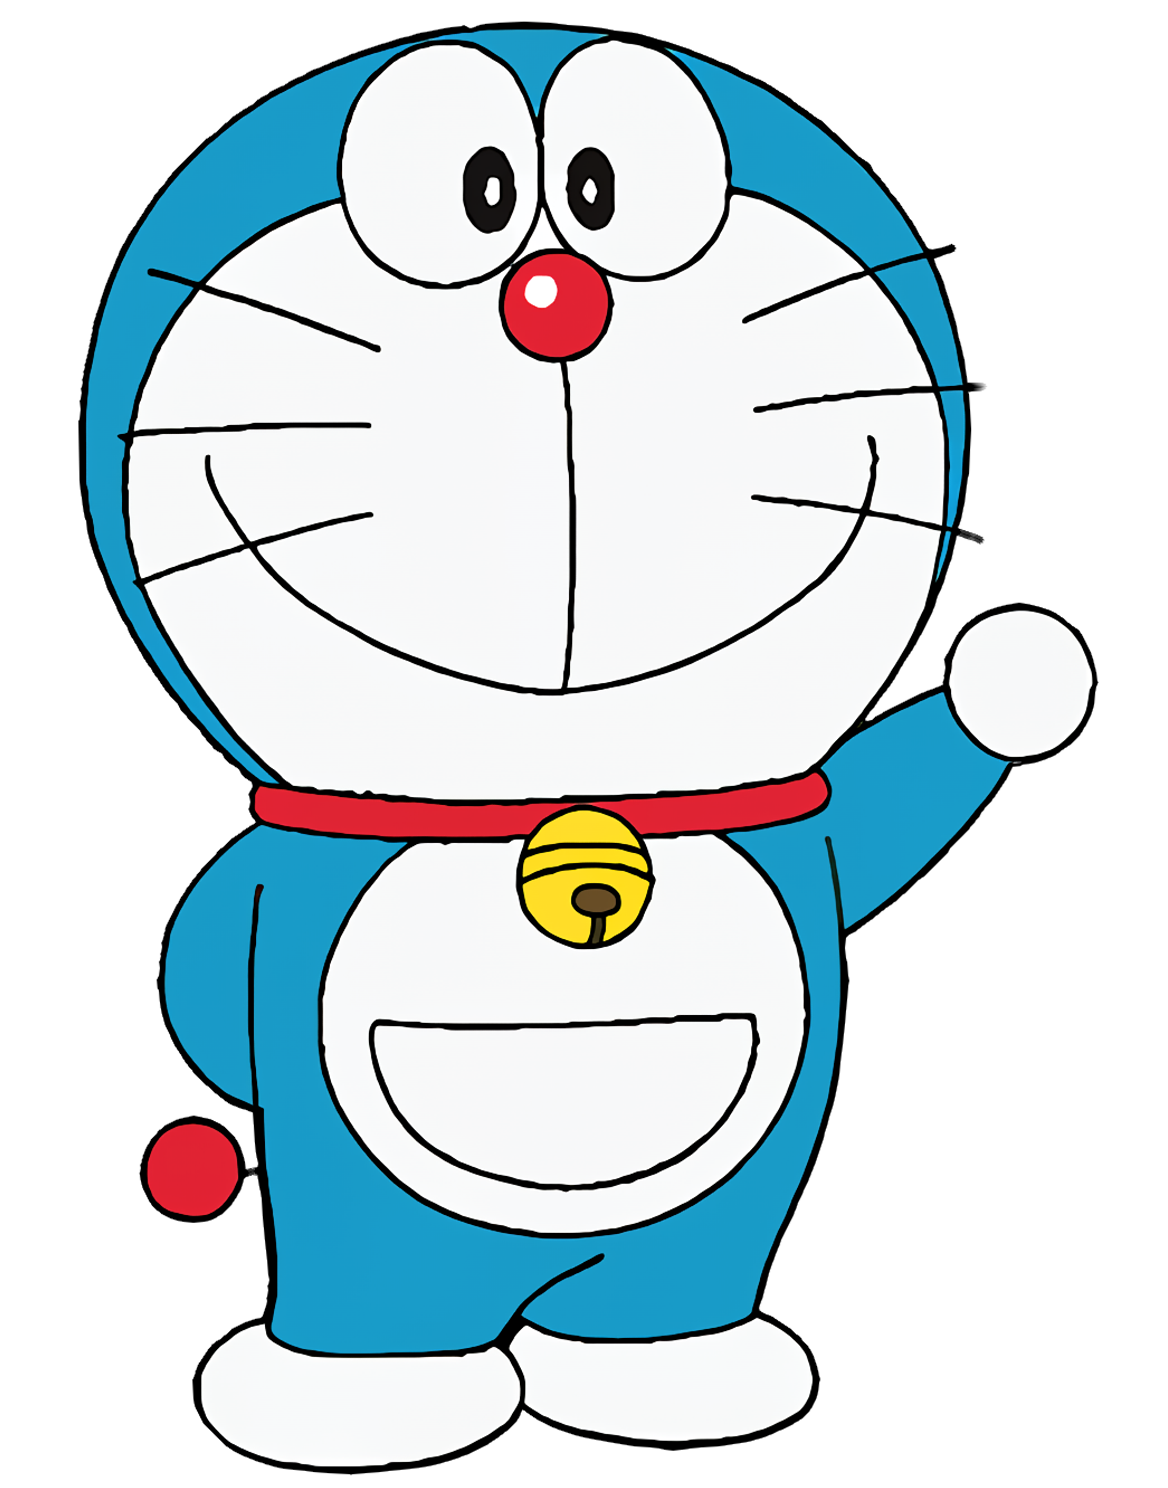 Doraemon India - Tell us what's your favourite gadget and why